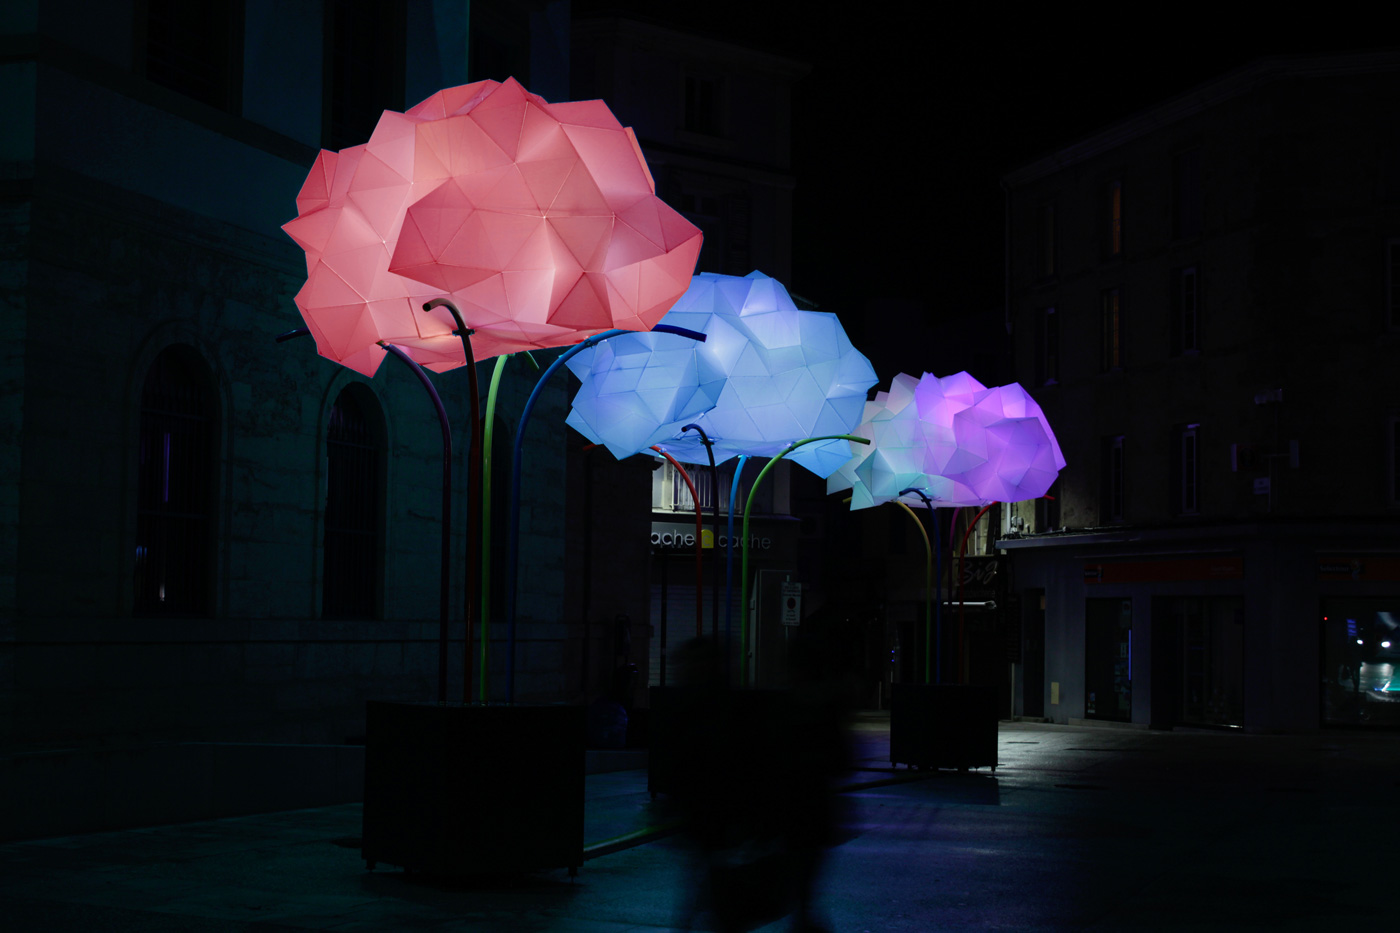 Located on the Upper Ground Level of Electric Boulevard, ‘Cloudy Lanterns’ is a light art installation with floating geometric matrixes that immerse themselves in the urban space by illuminating their diffuse and crystalline glow.